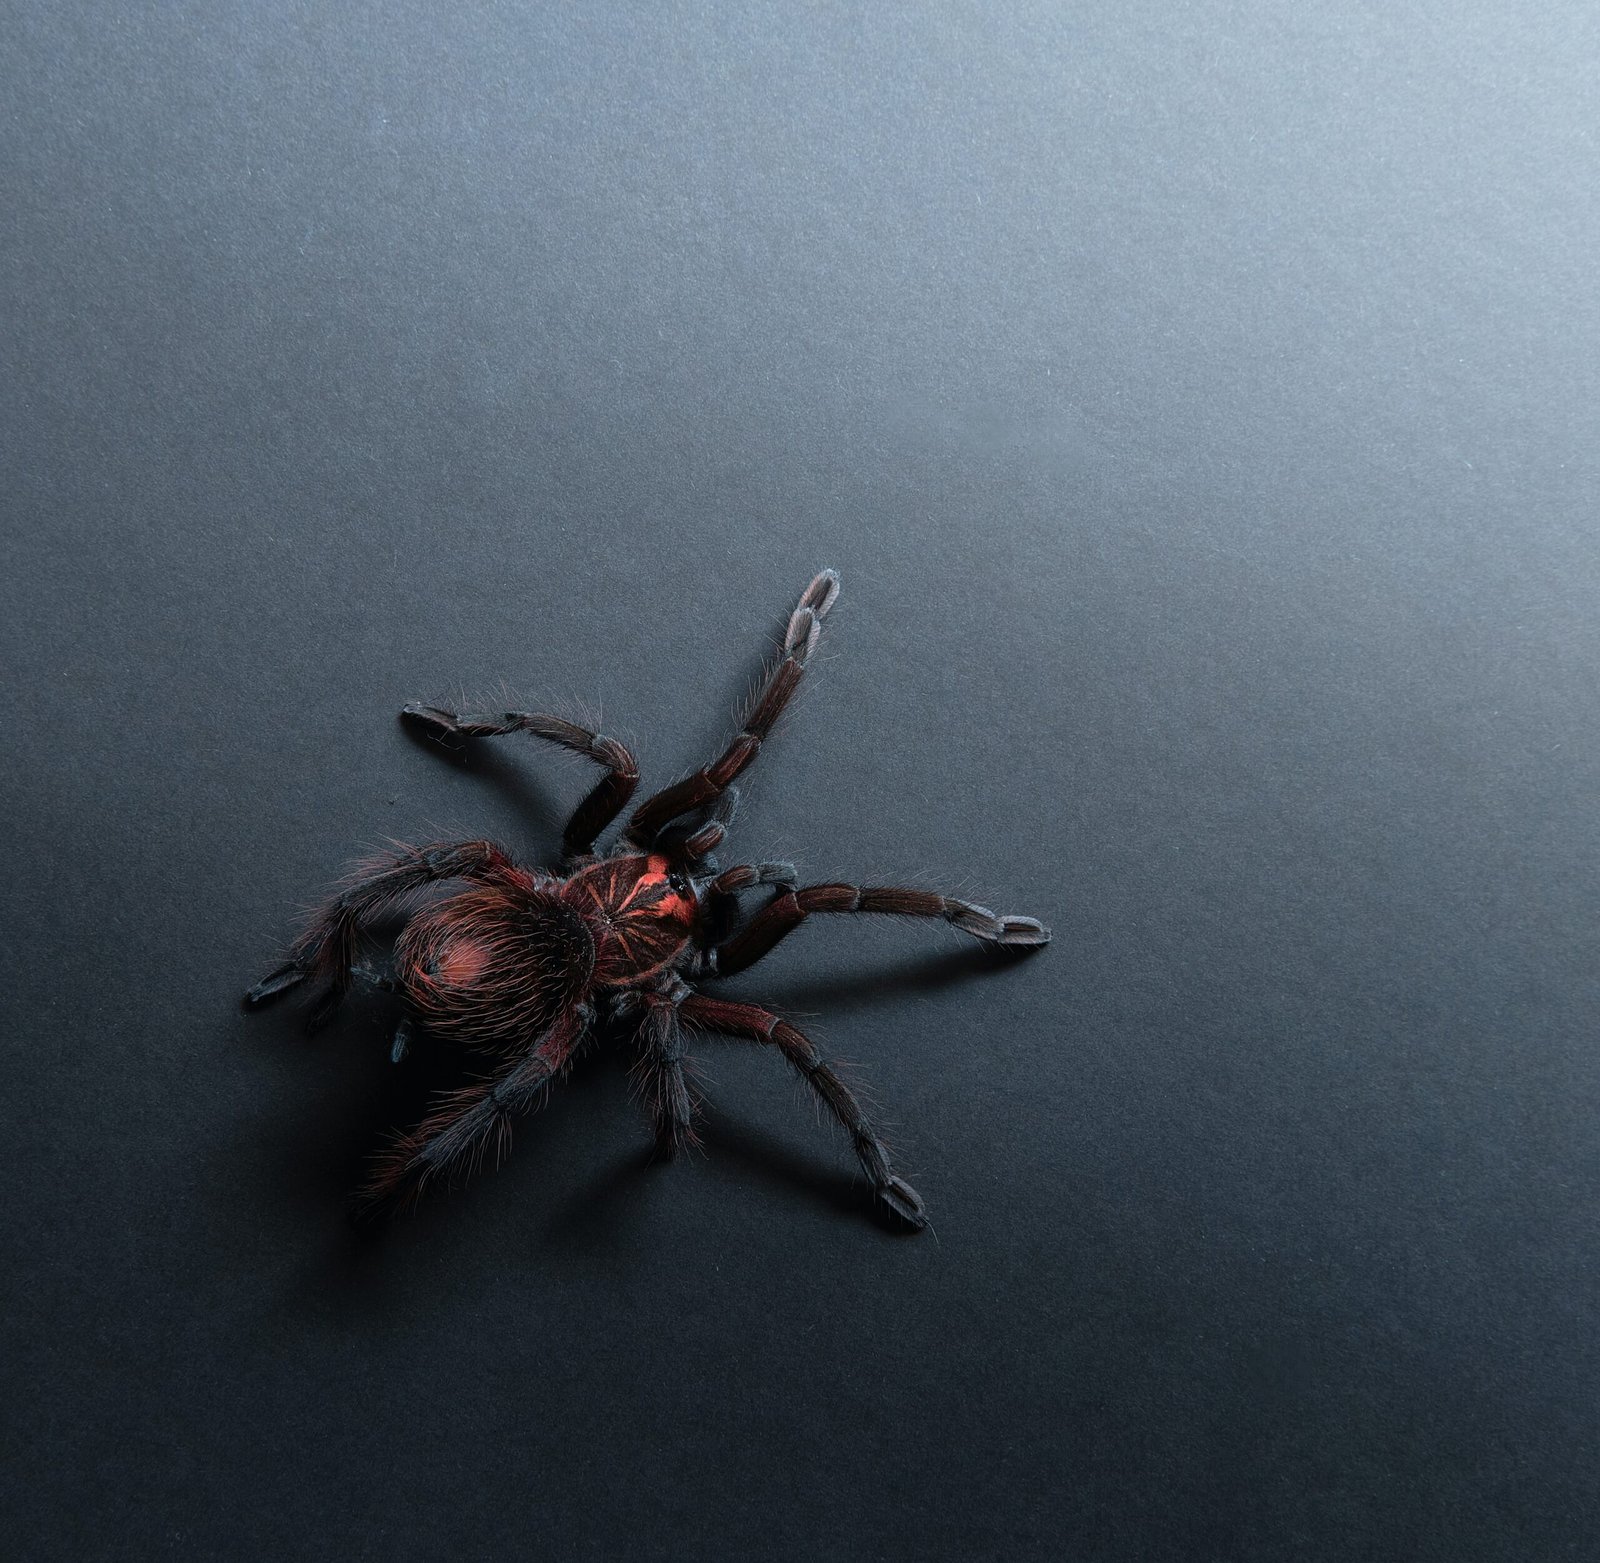 Are There Any Risks Associated With Leaving A Male Tarantula With The Female After Mating?